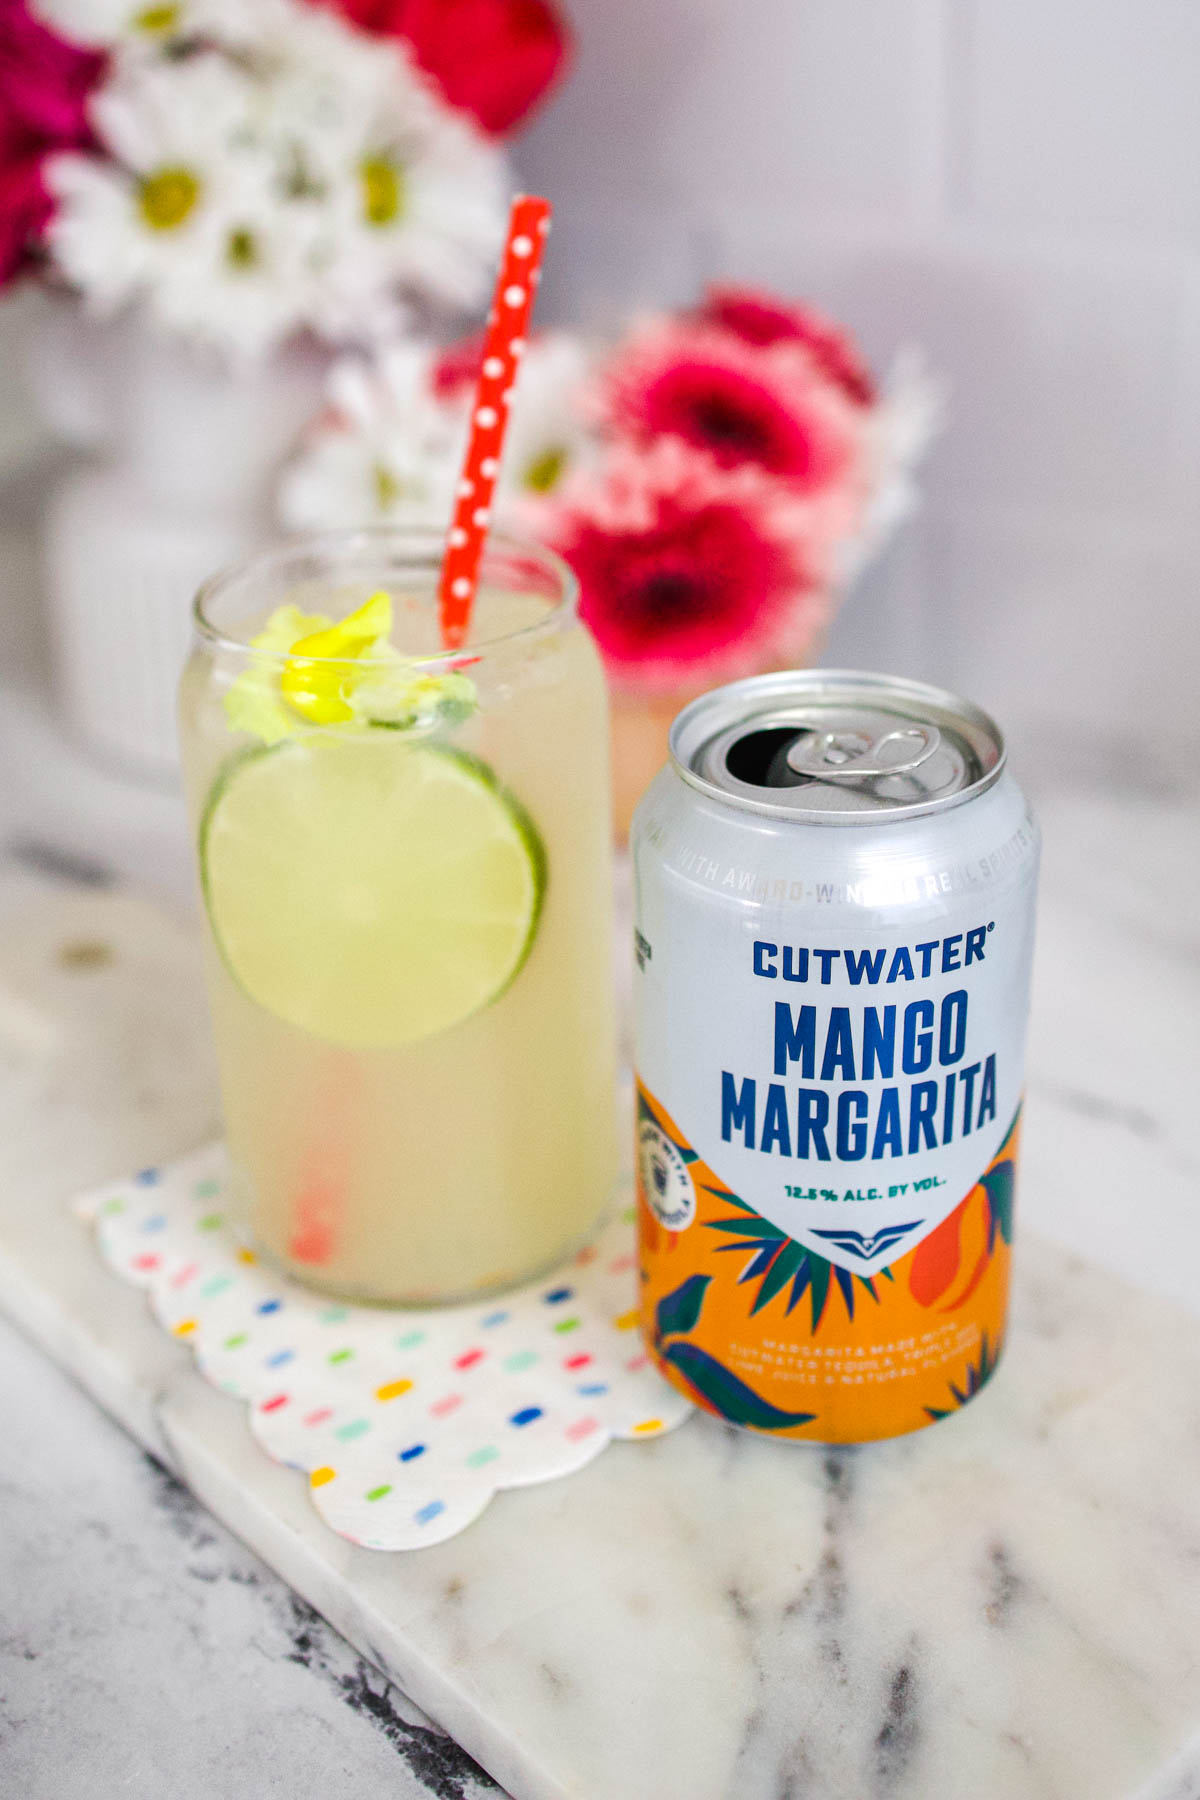 A can of Cutwater Mango Margarita on a table next to a glass holding the cocktail.